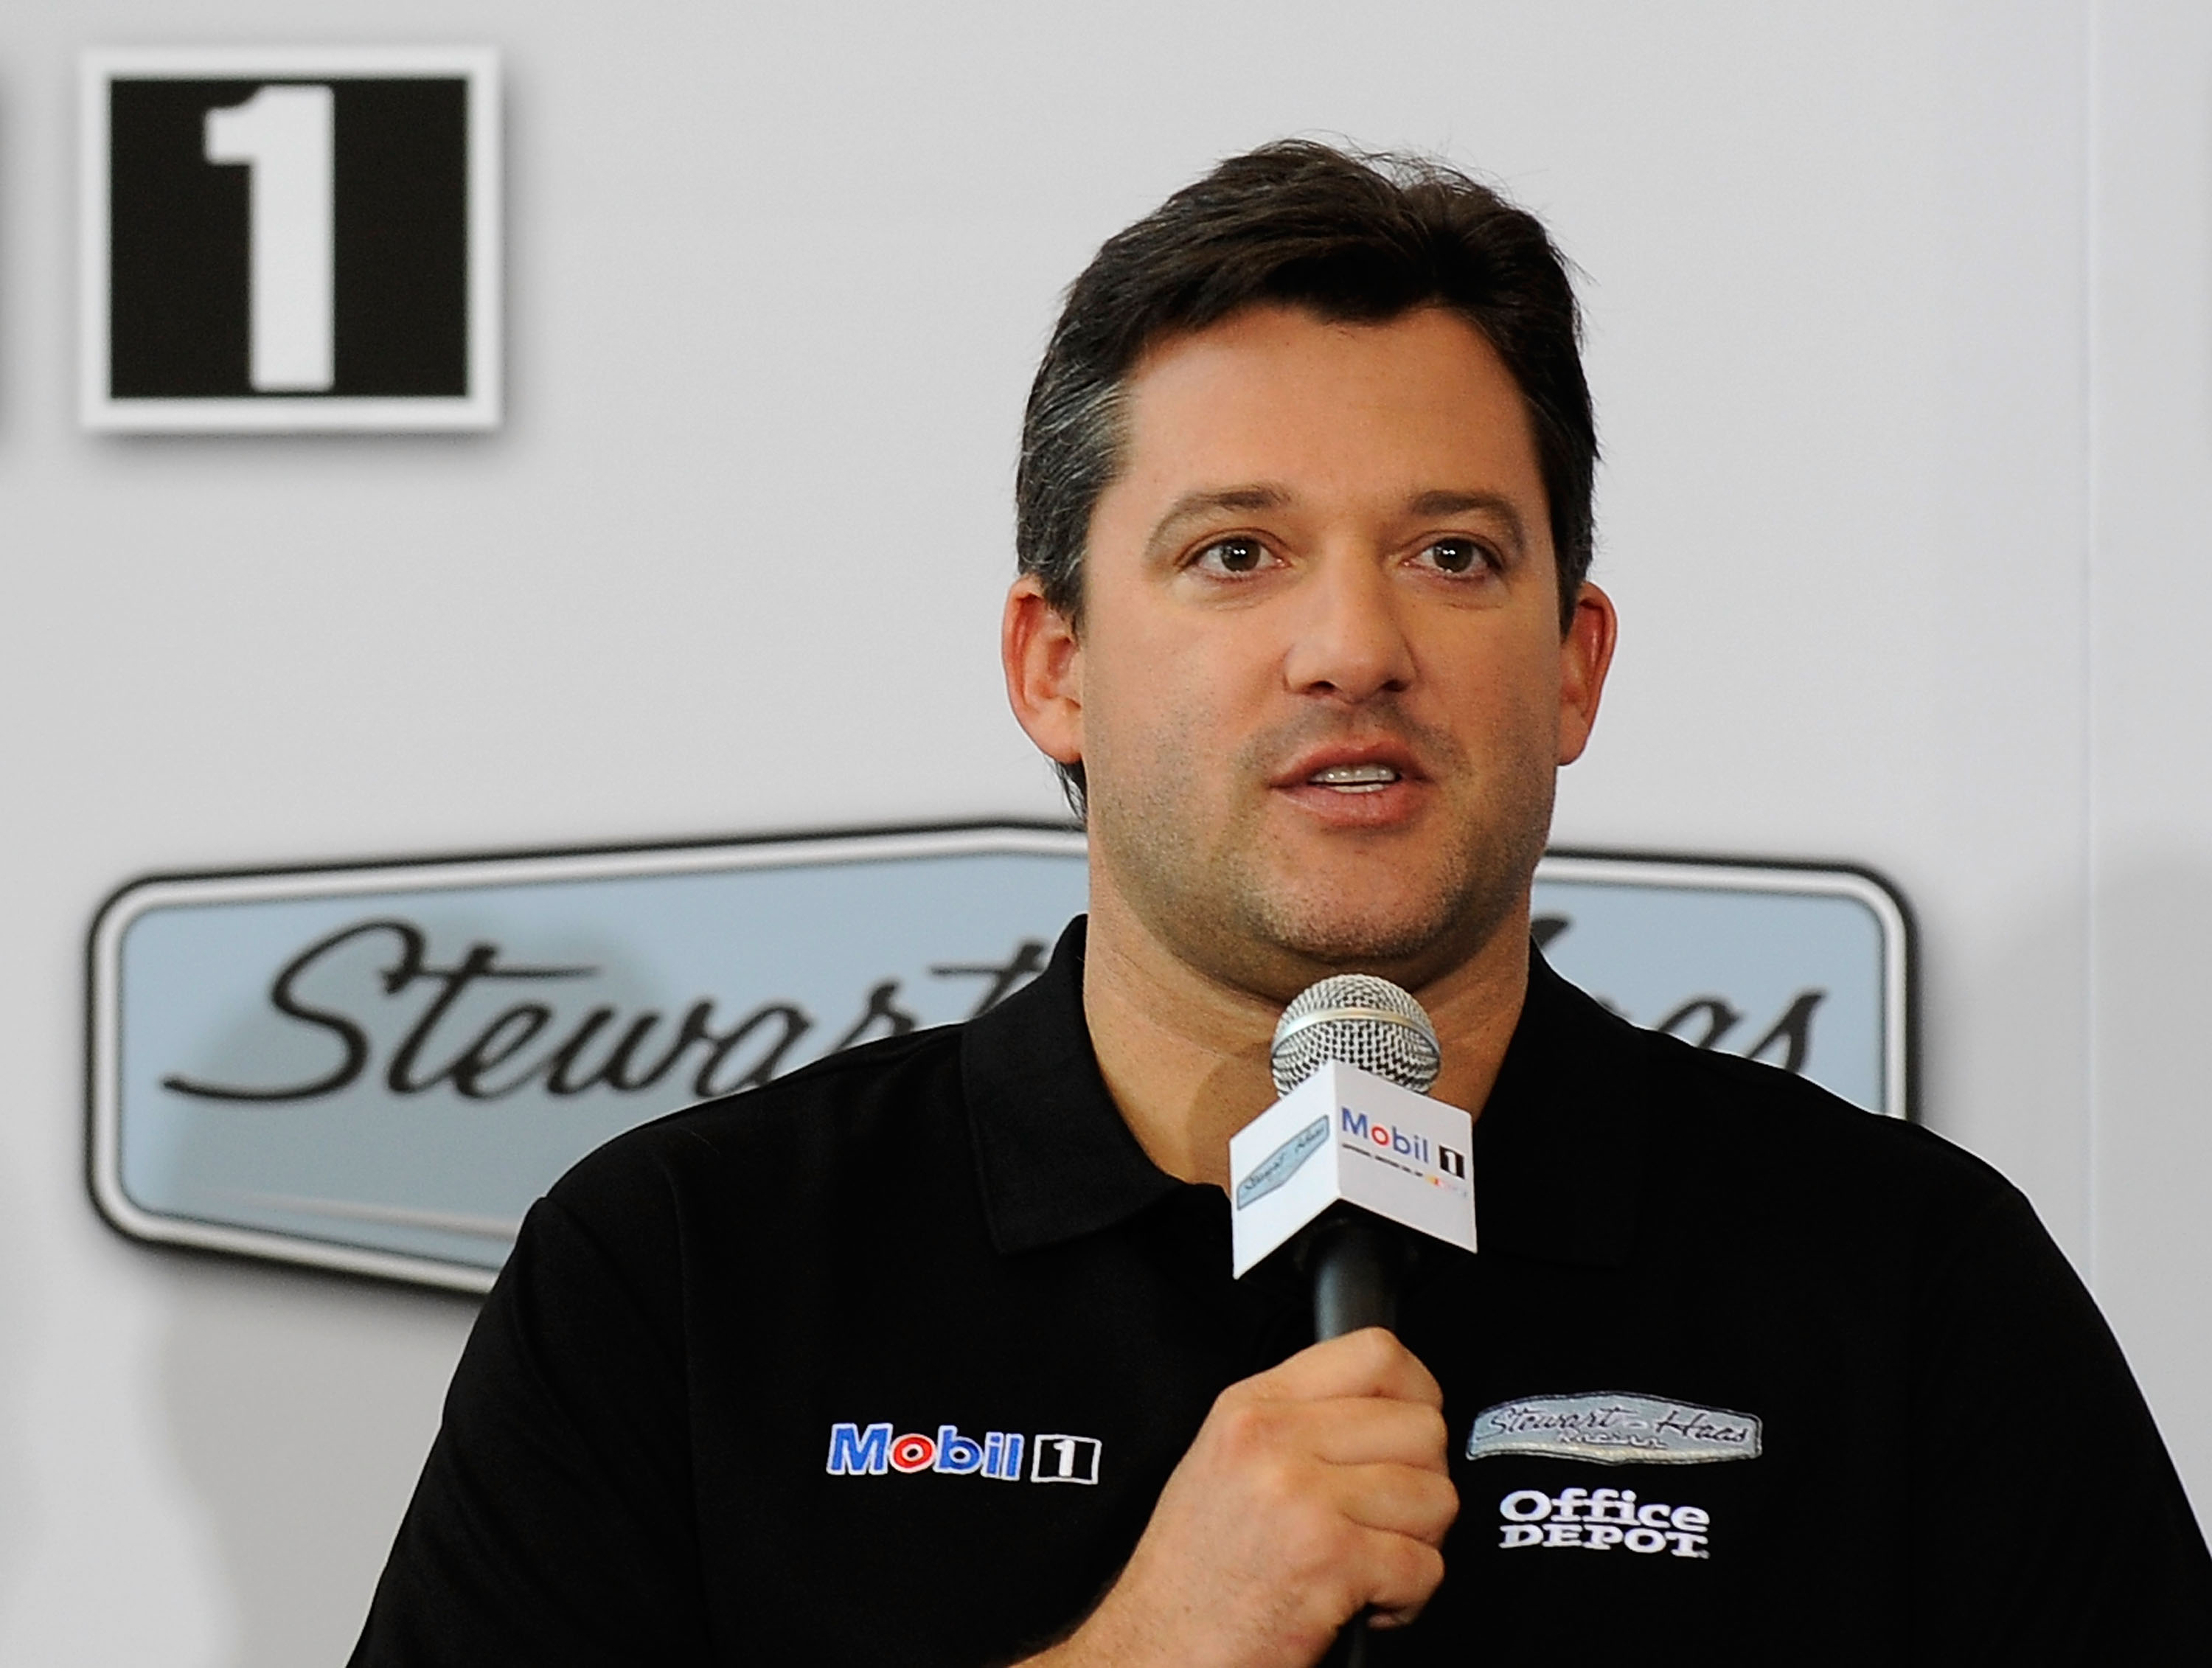 KANNAPOLIS, NC - OCTOBER 12:  Tony Stewart, Stewart-Haas Racing's driver/owner, announced Mobil 1 as his co-primary sponsor with Office Depot beginning in 2011 at Stewart-Haas Racing on October 12, 2010 in Kannapolis, North Carolina.  (Photo by Rusty Jarr